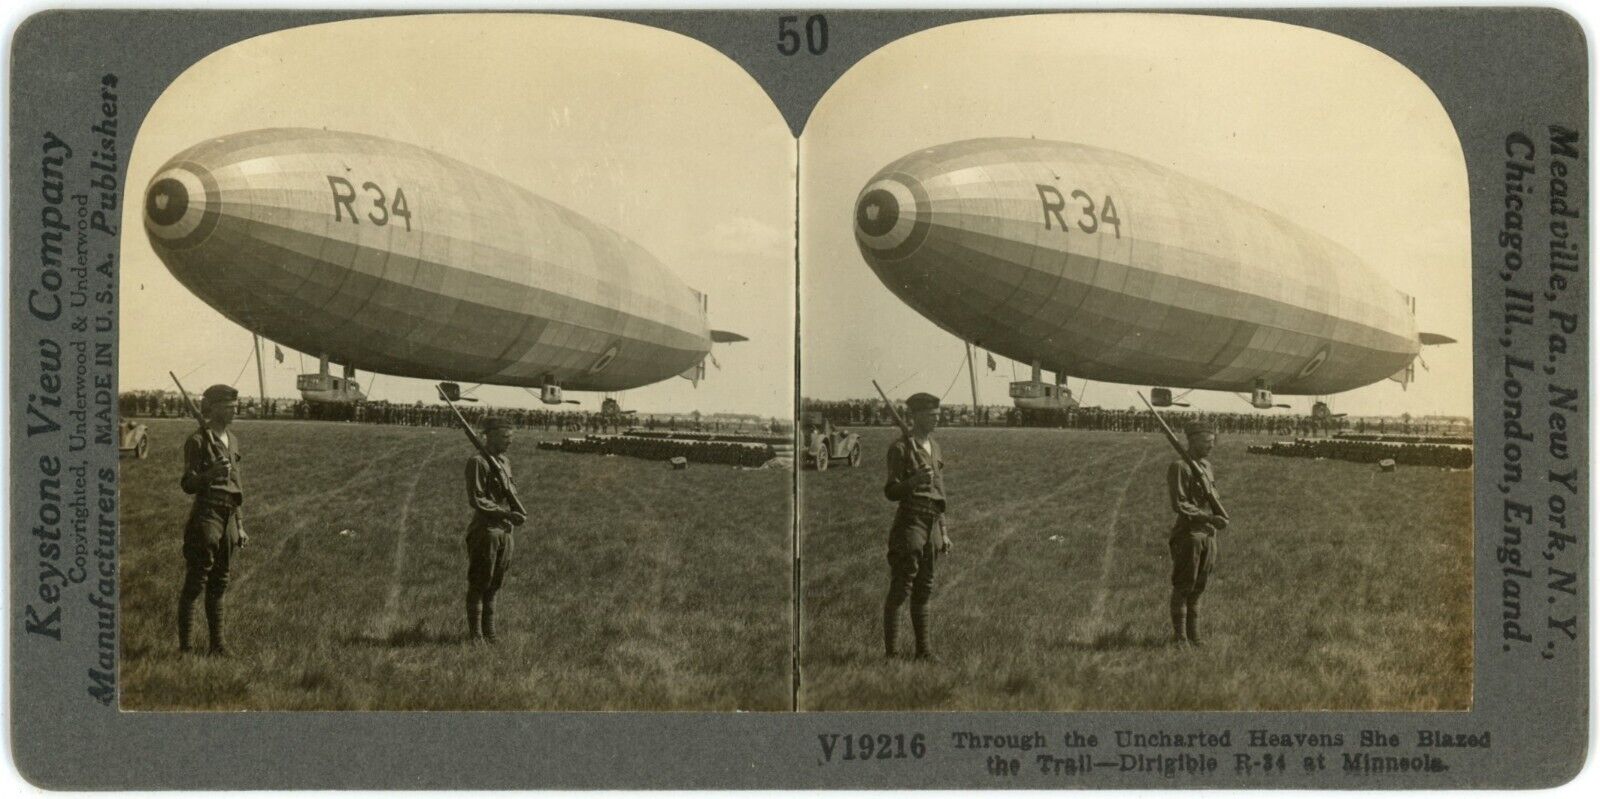 c1900's Keystone Real Photo Stereoview Card Soldiers Dirigible R-34 at Minneola